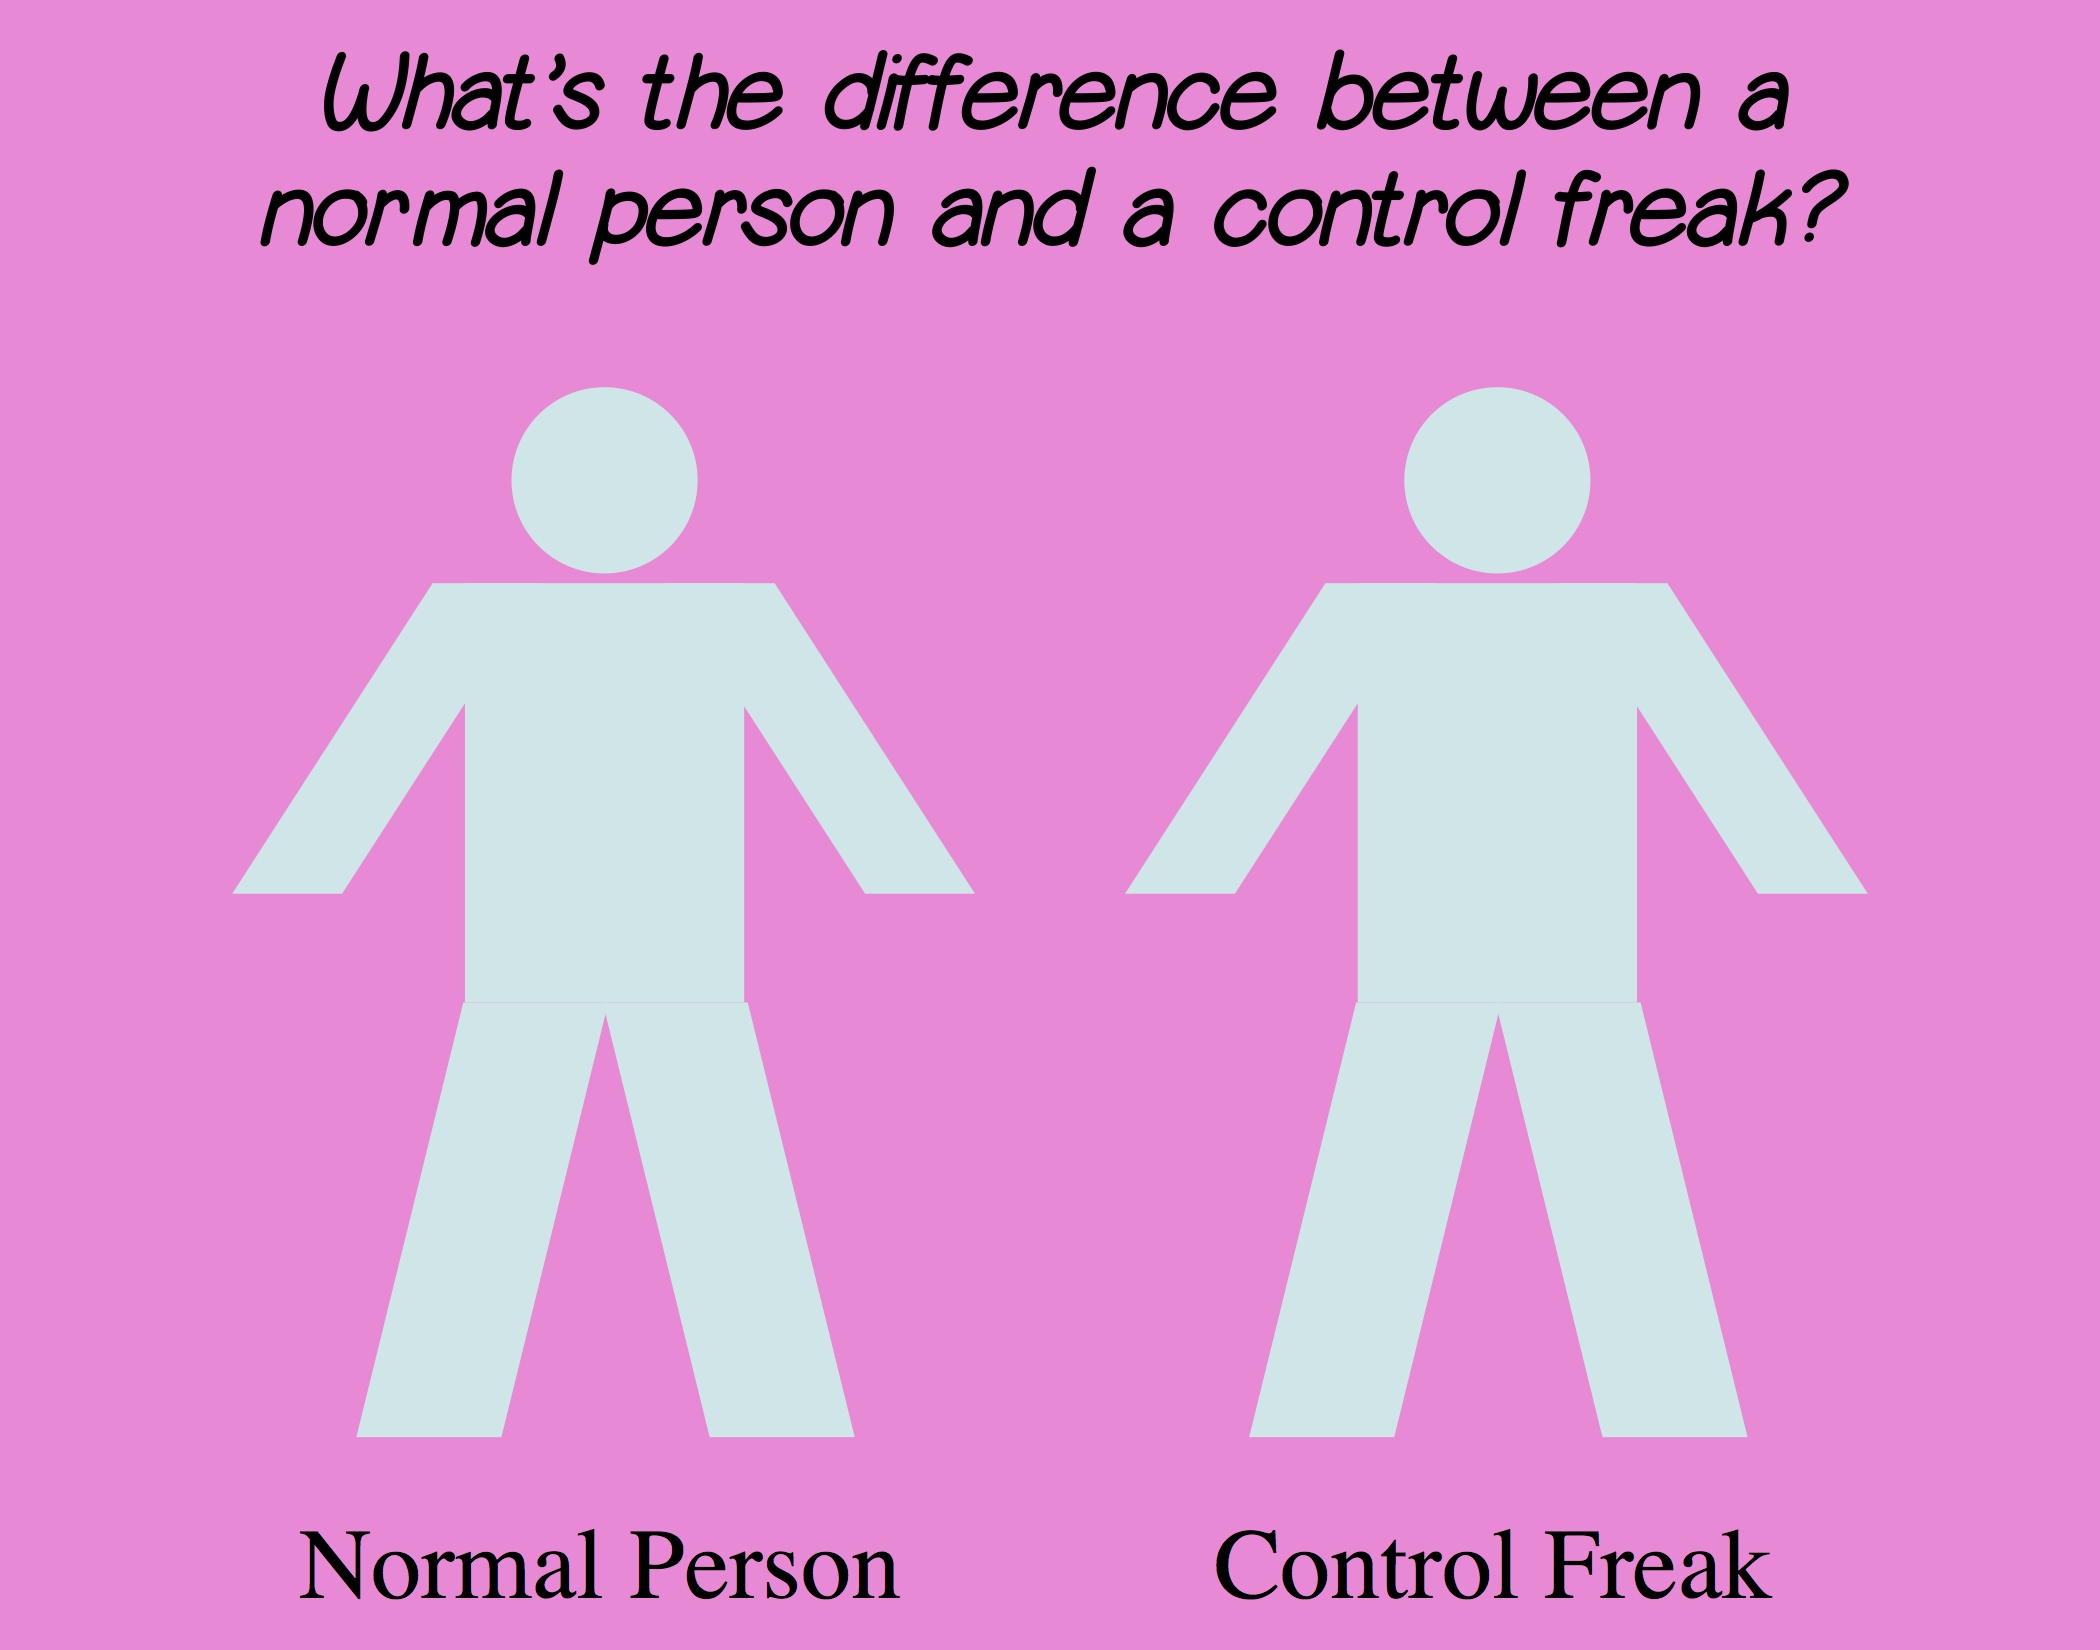 What's the difference between a normal person and a control freak